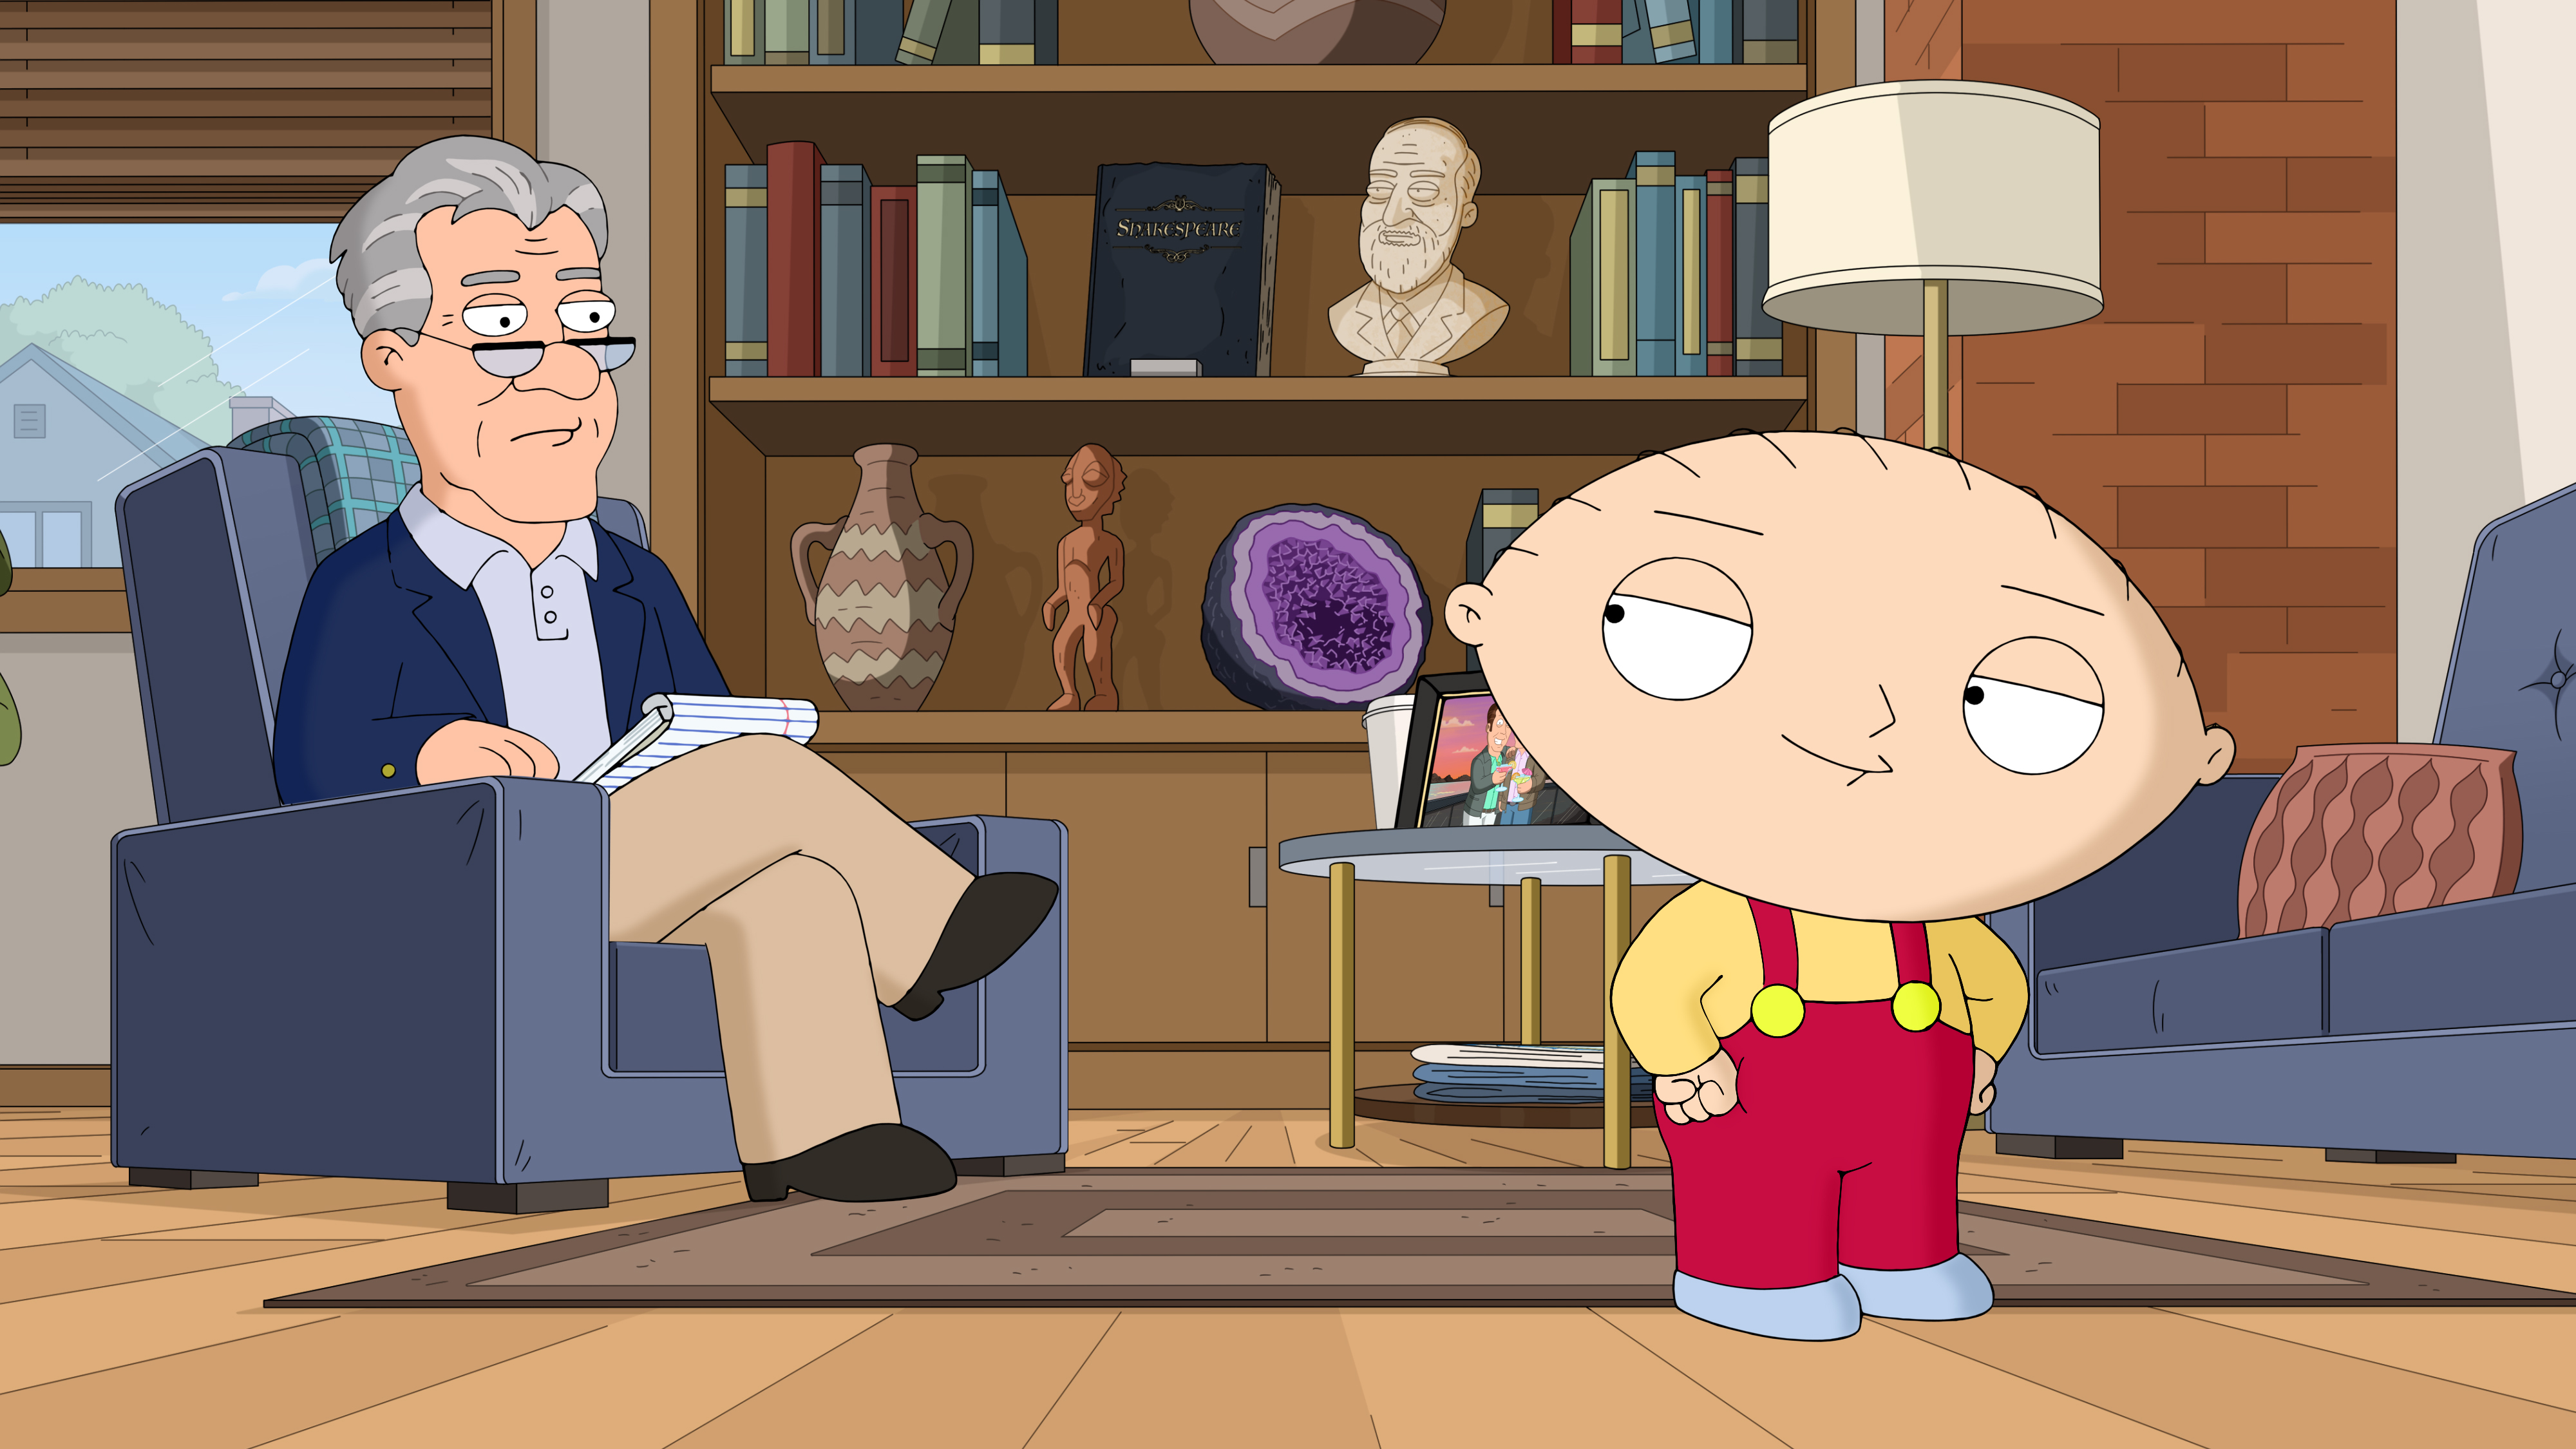 The Family Guy cartoon featuring the famous Stewie Griffin